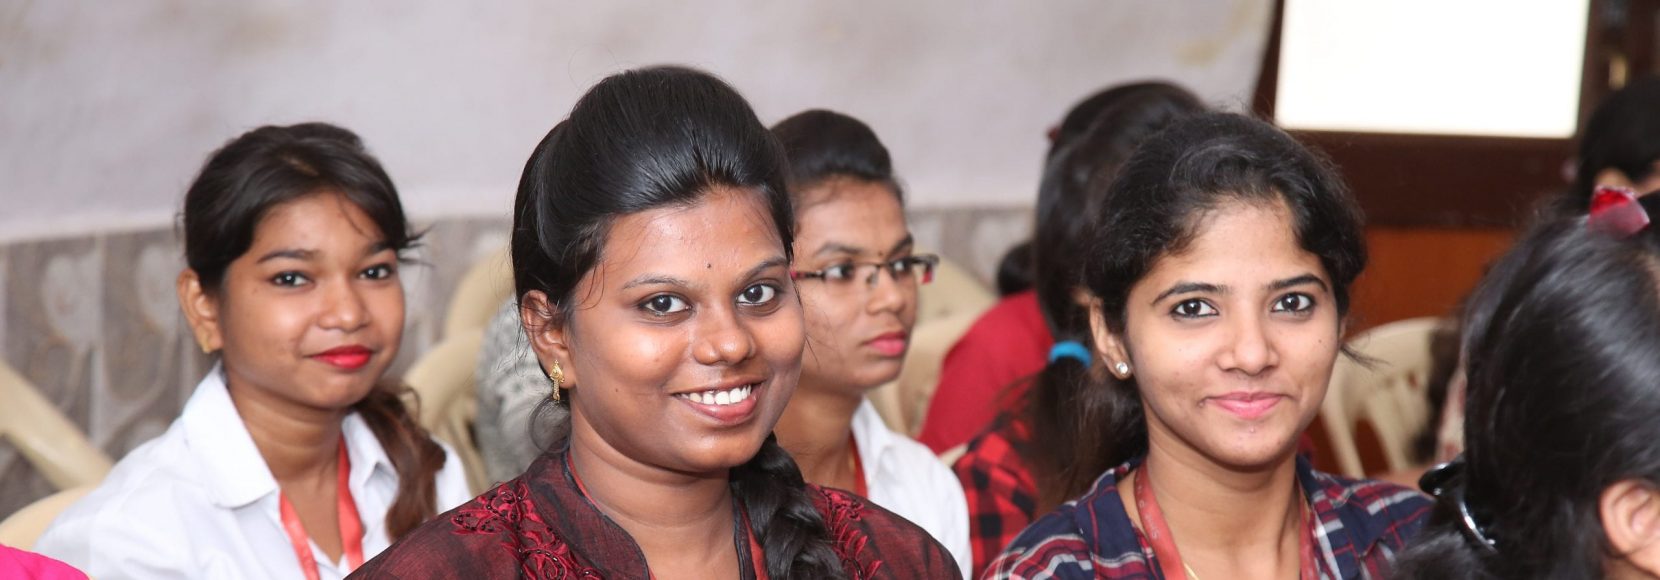 Students participate in a youth employability program in India